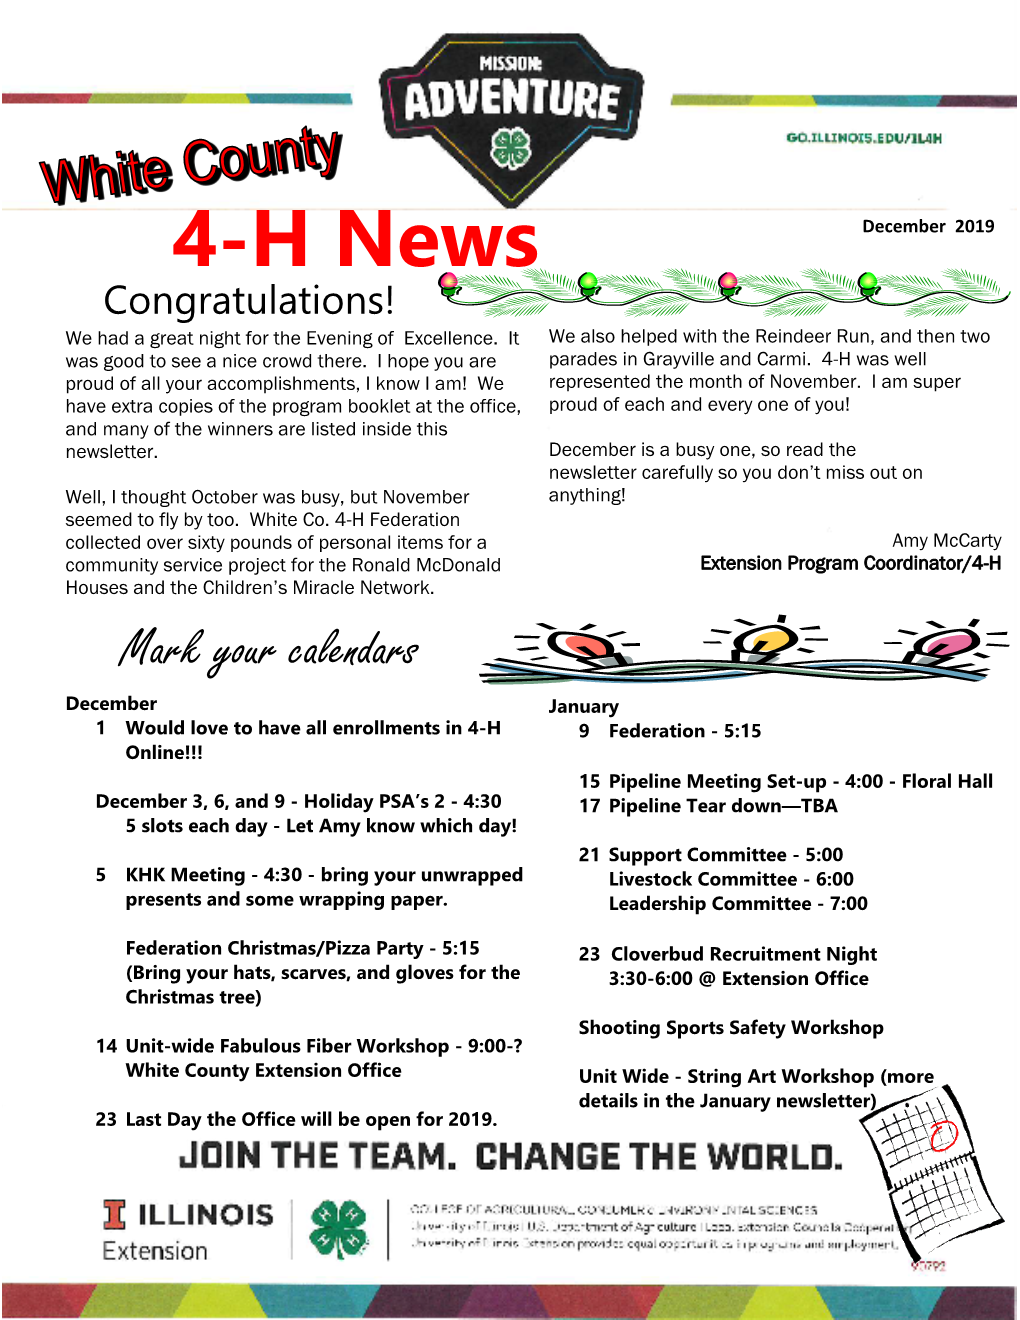 4-H News December 2019 Congratulations! We Had a Great Night for the Evening of Excellence